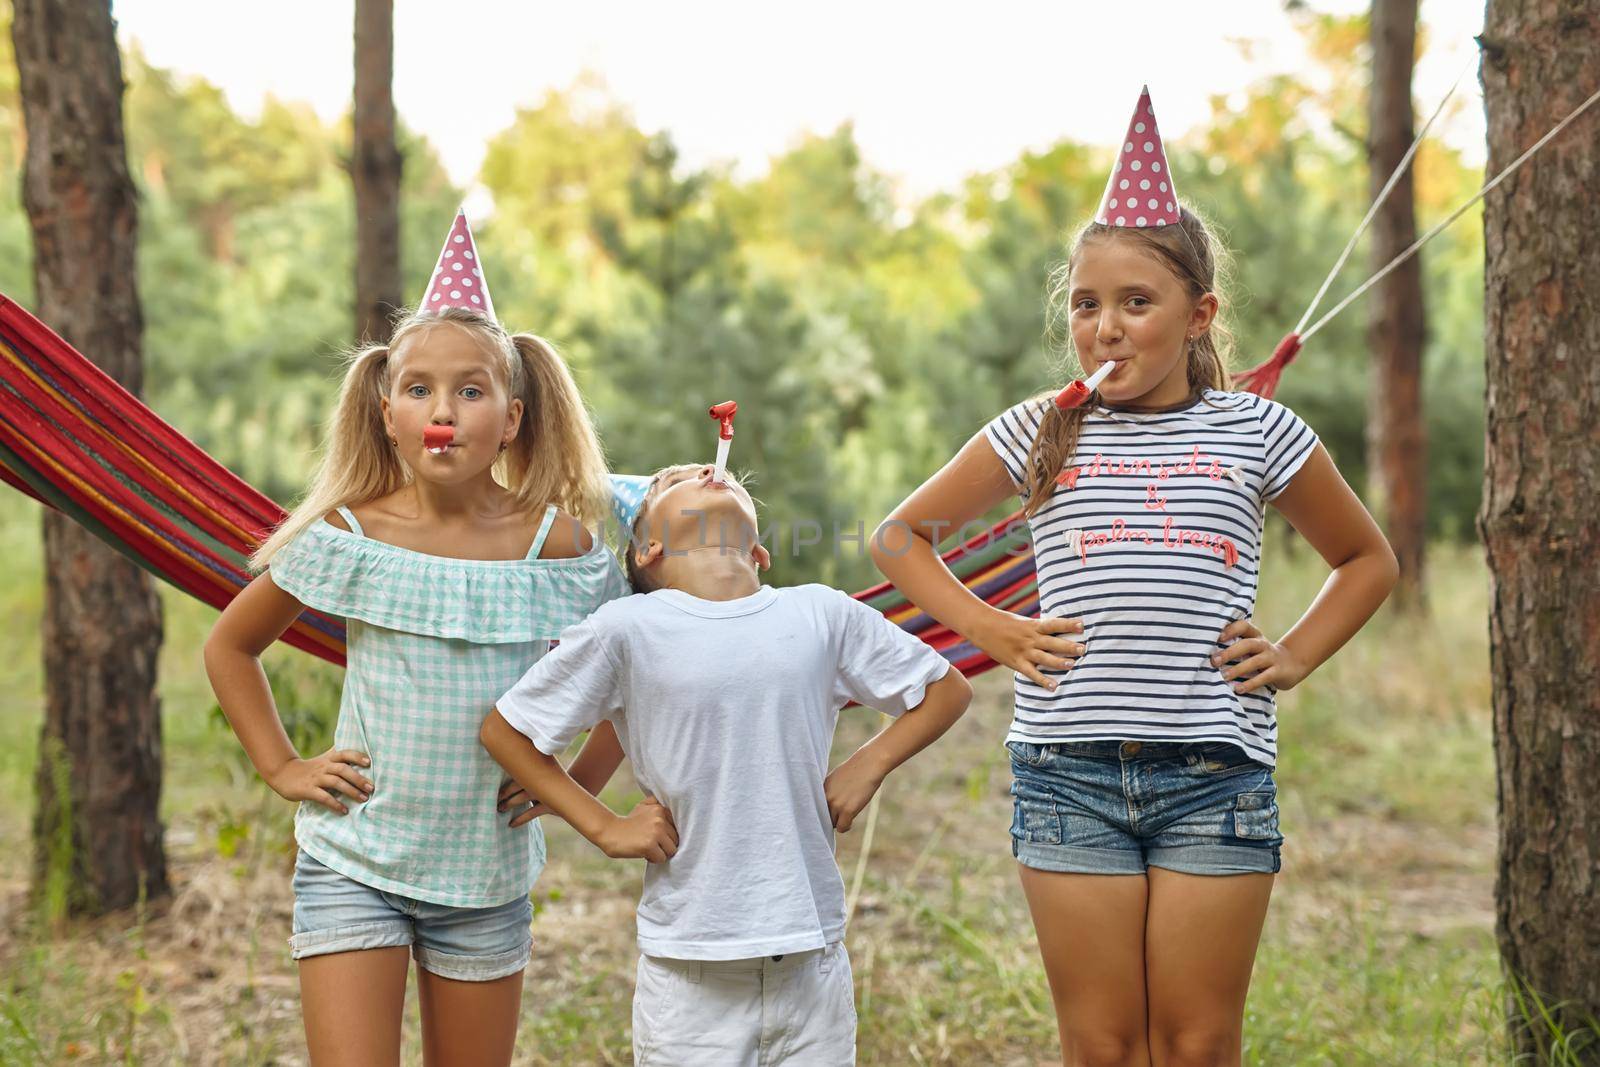 birthday, childhood and celebration concept - close up of happy kids blowing party horns and having fun in summer outdoors